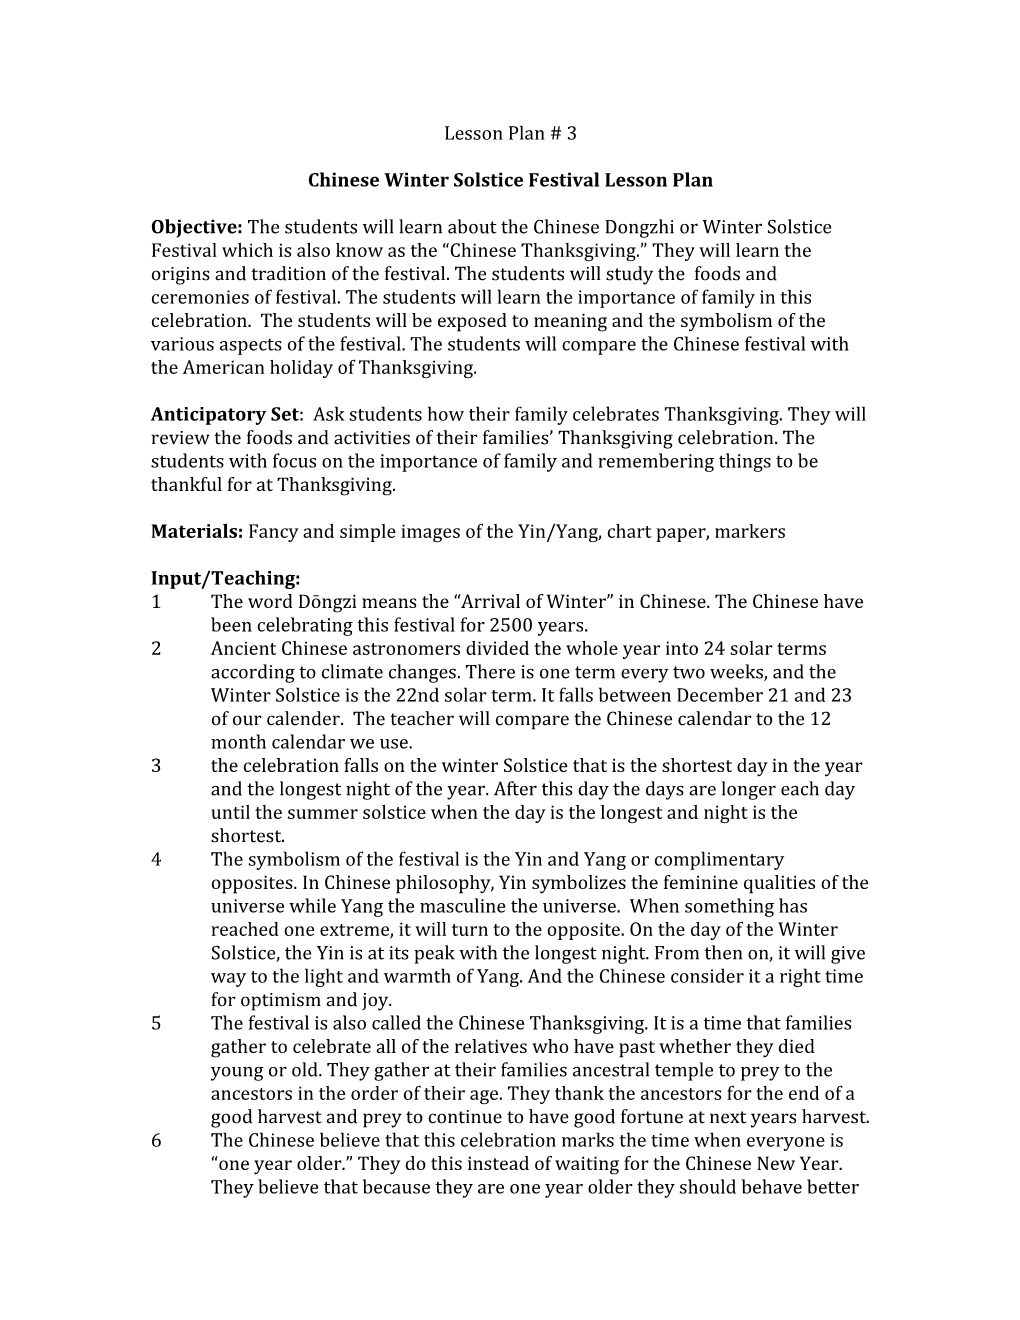 Chinese Winter Solstice Festival Lesson Plan